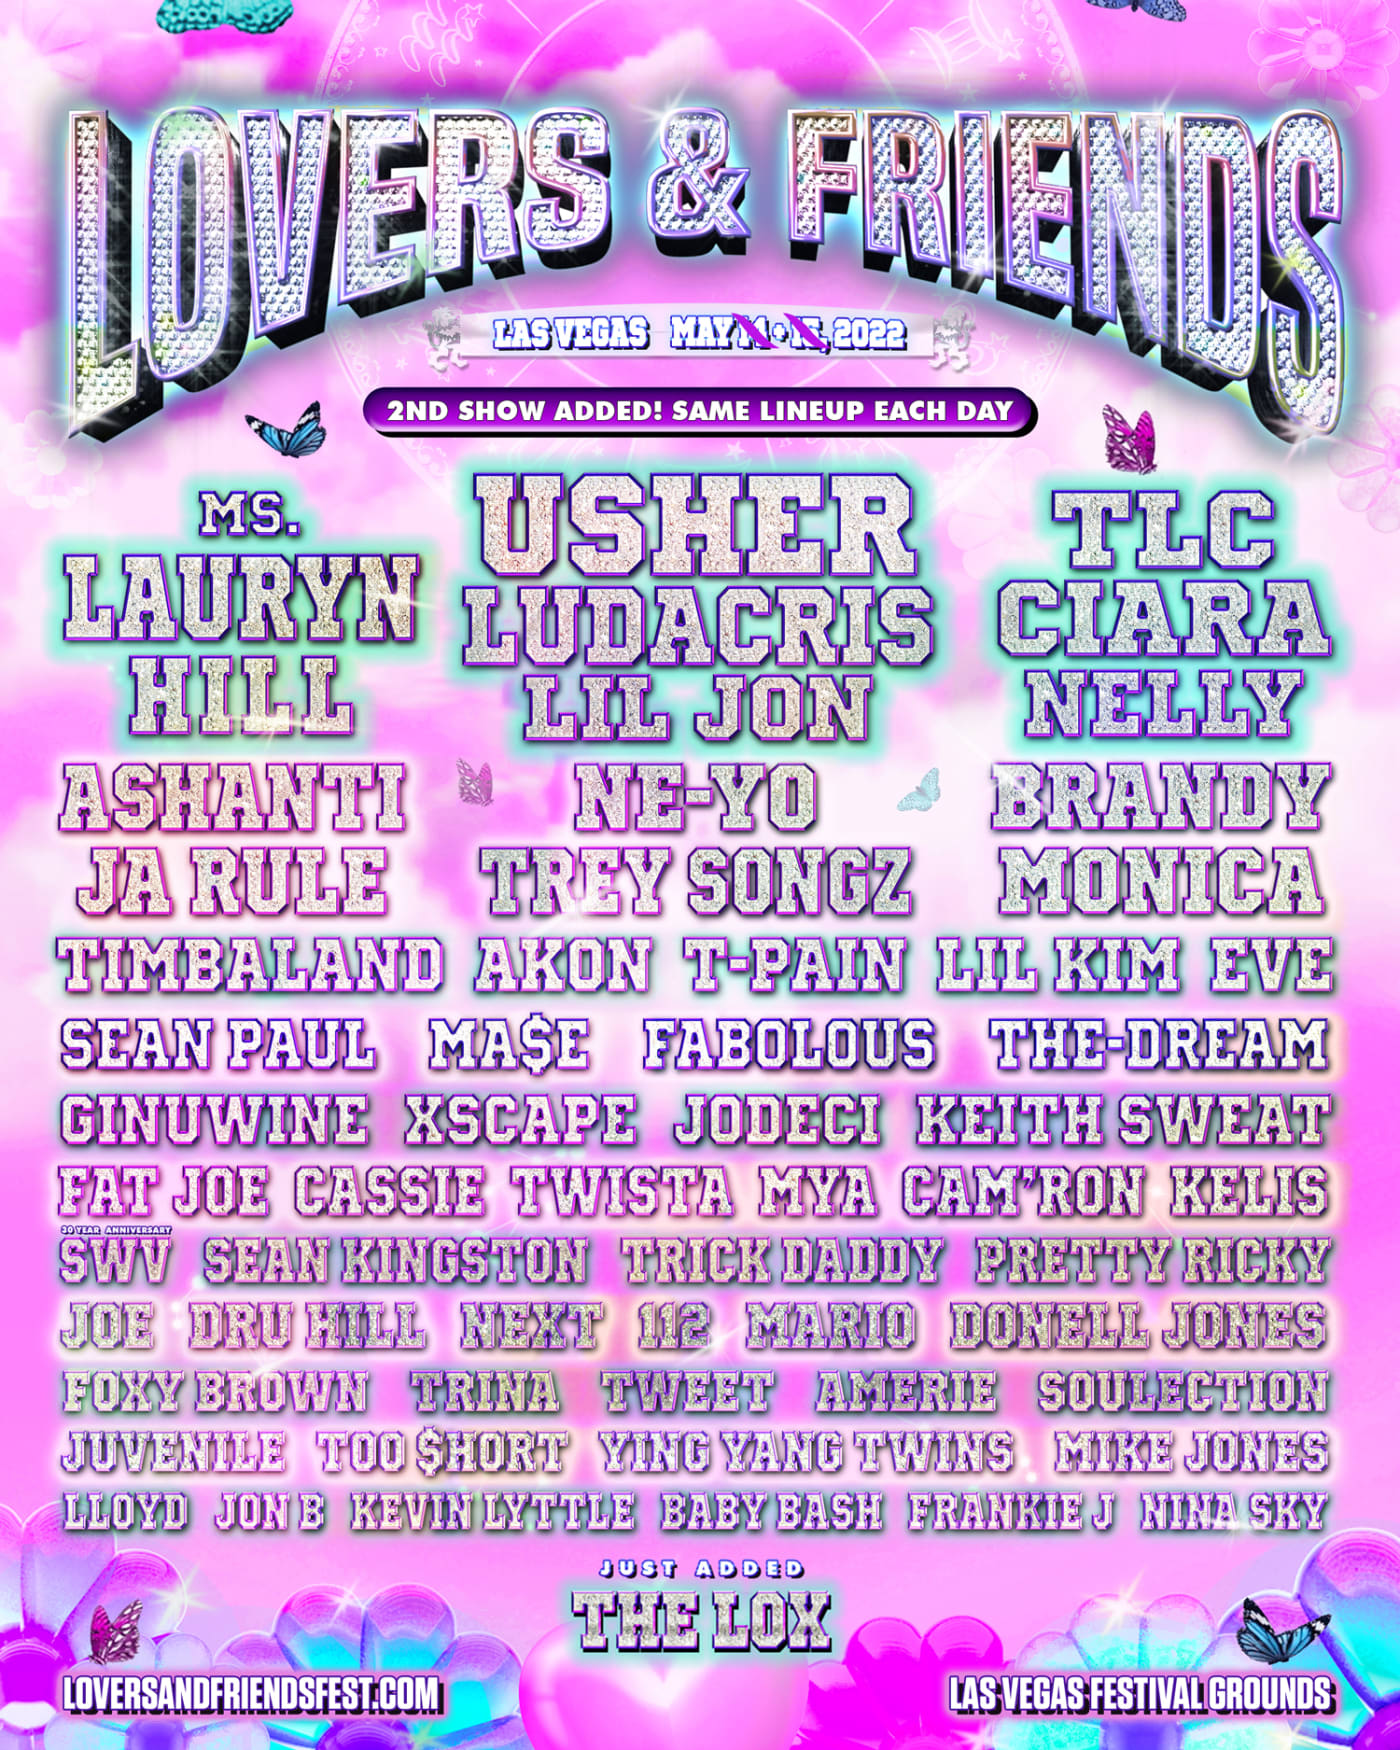 A flyer for the Lovers and Friends festival is shown